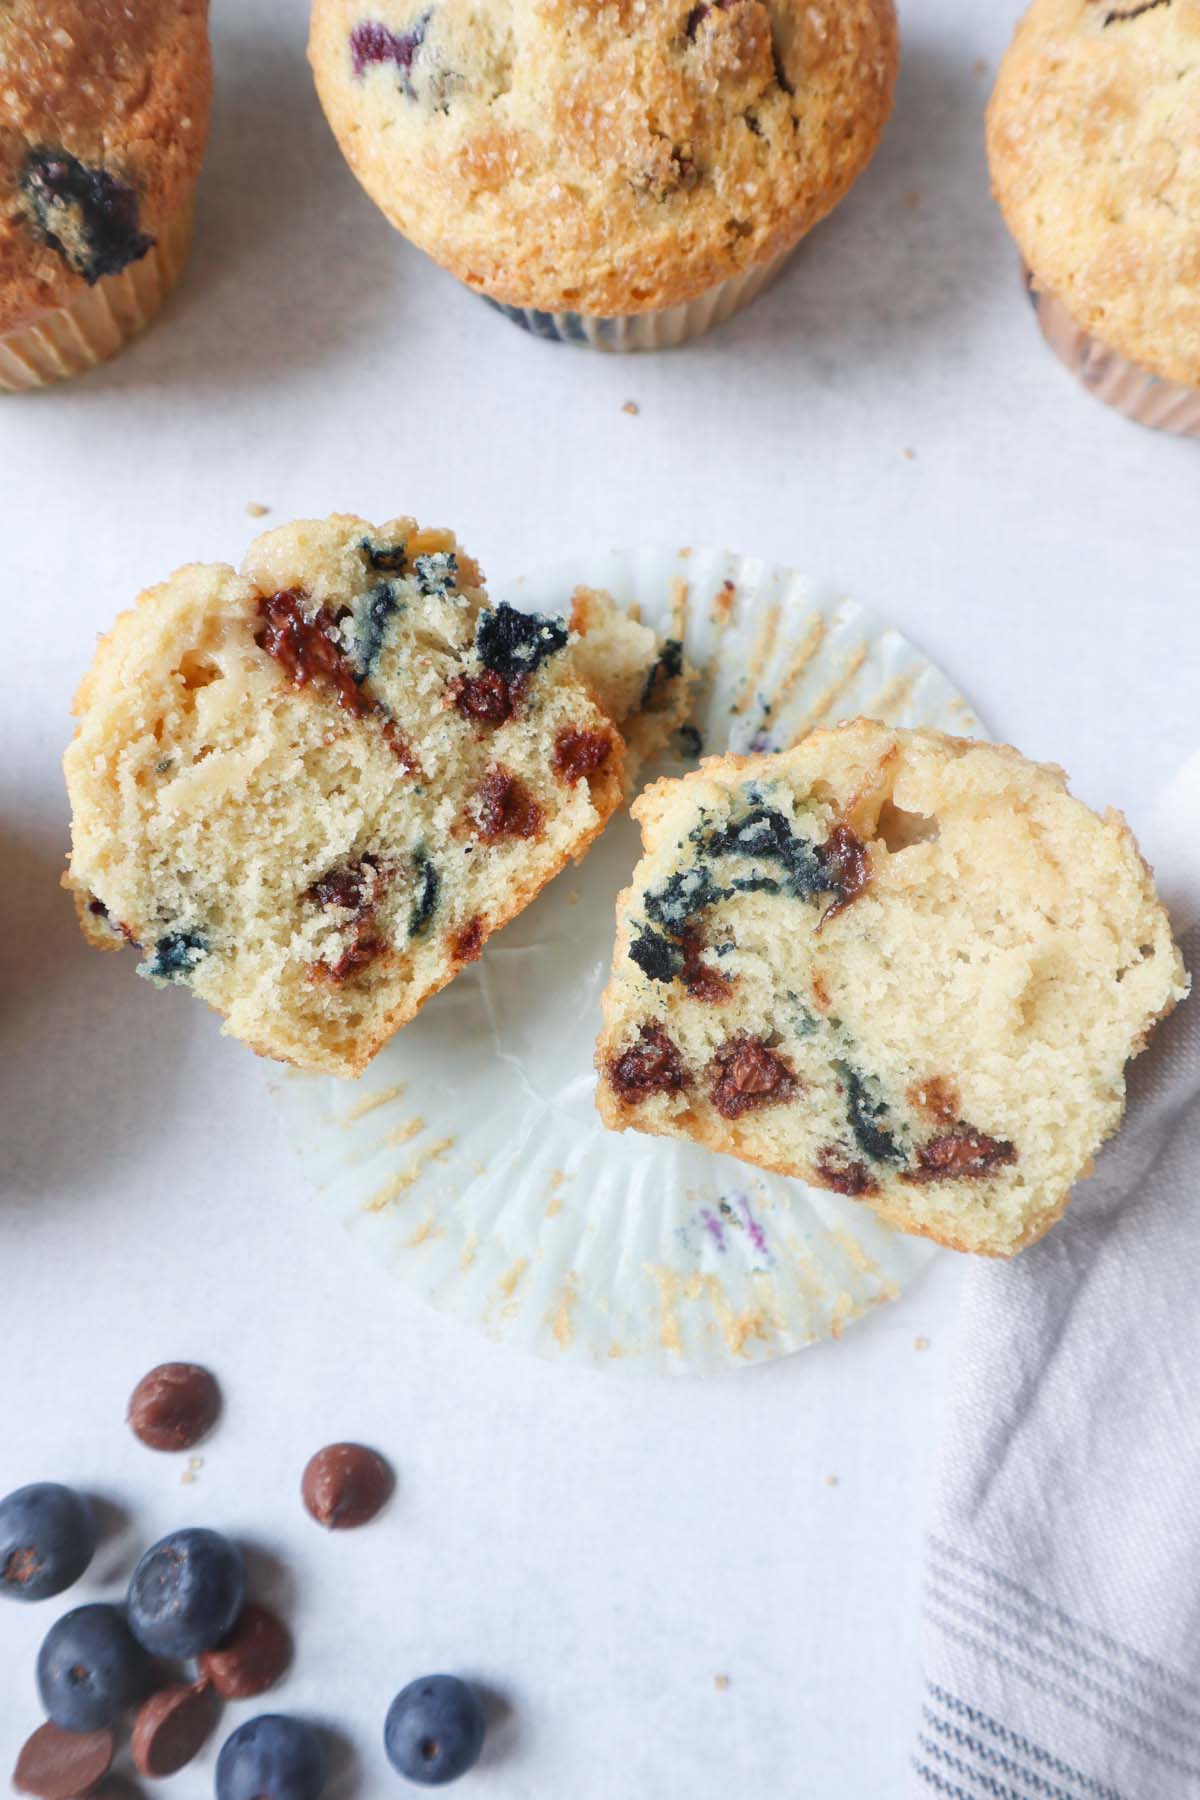 one blueberry chocolate chip muffin cut in half surrounded by other muffins and blueberries and chocolate chips